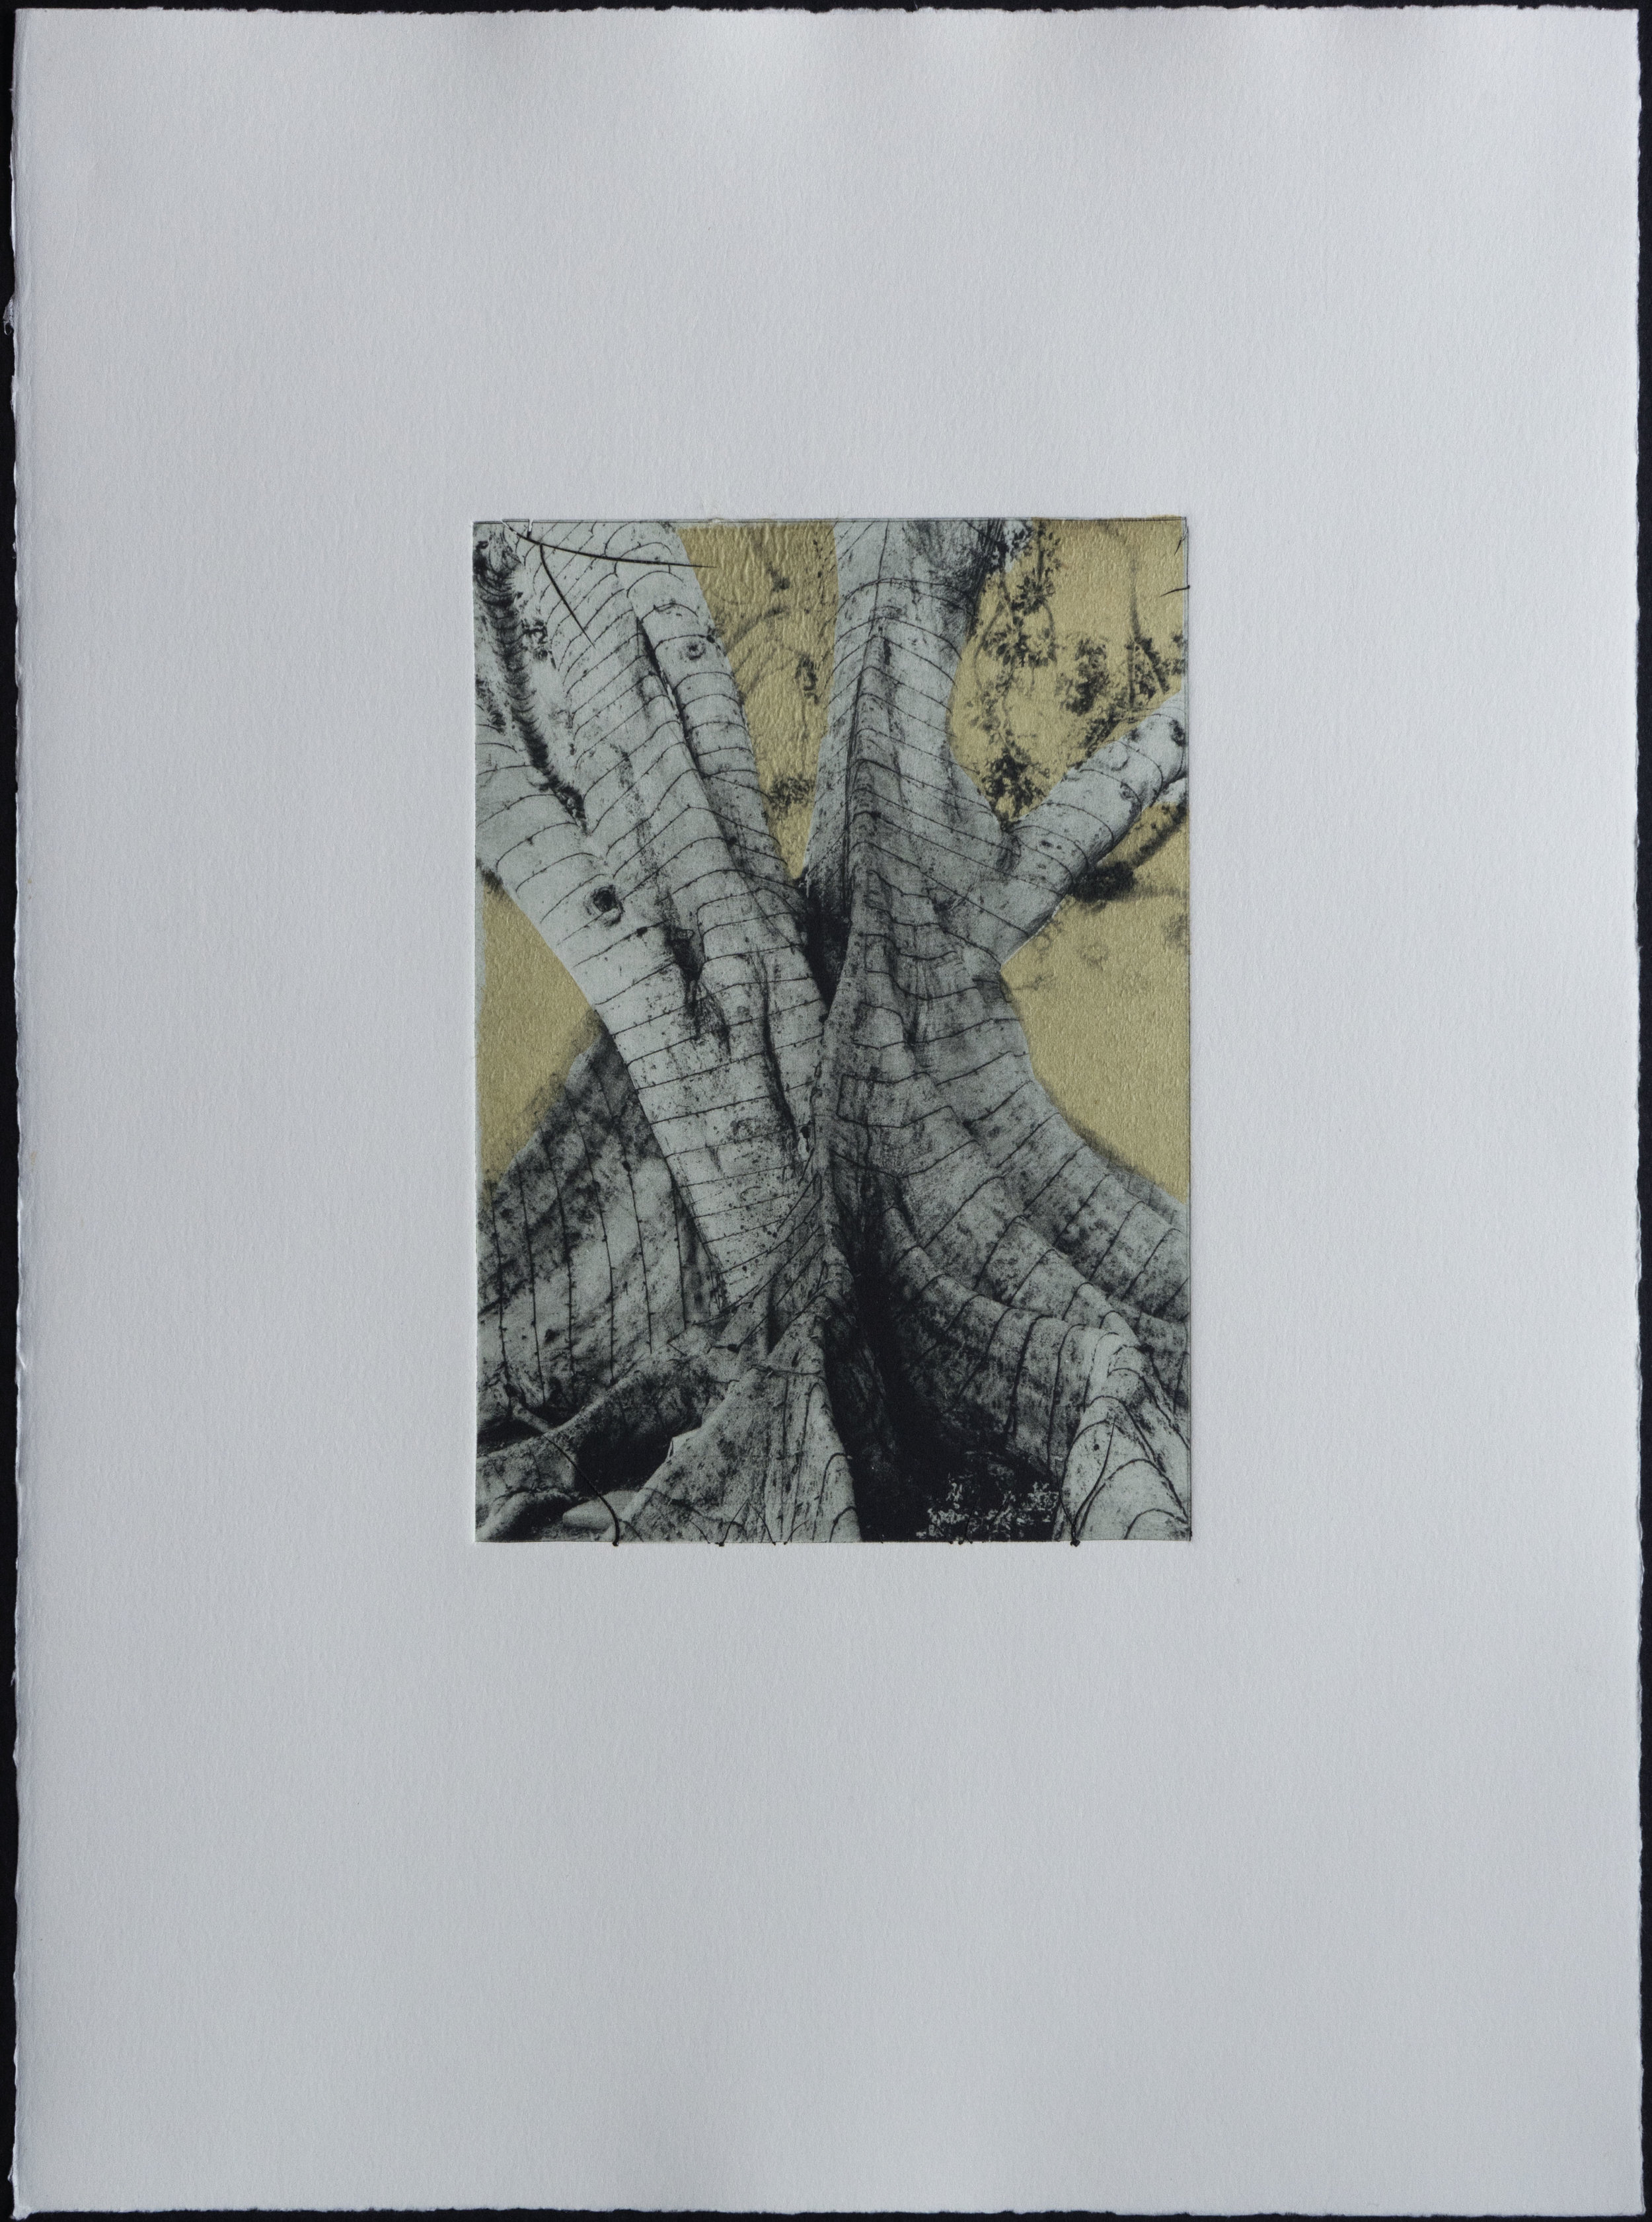    Untitled   (AAA_F.macrophylla_Los Angeles, CA, MT), 2016  Intaglio (Photopolymer), Chine Collé, 11 x 15 in 